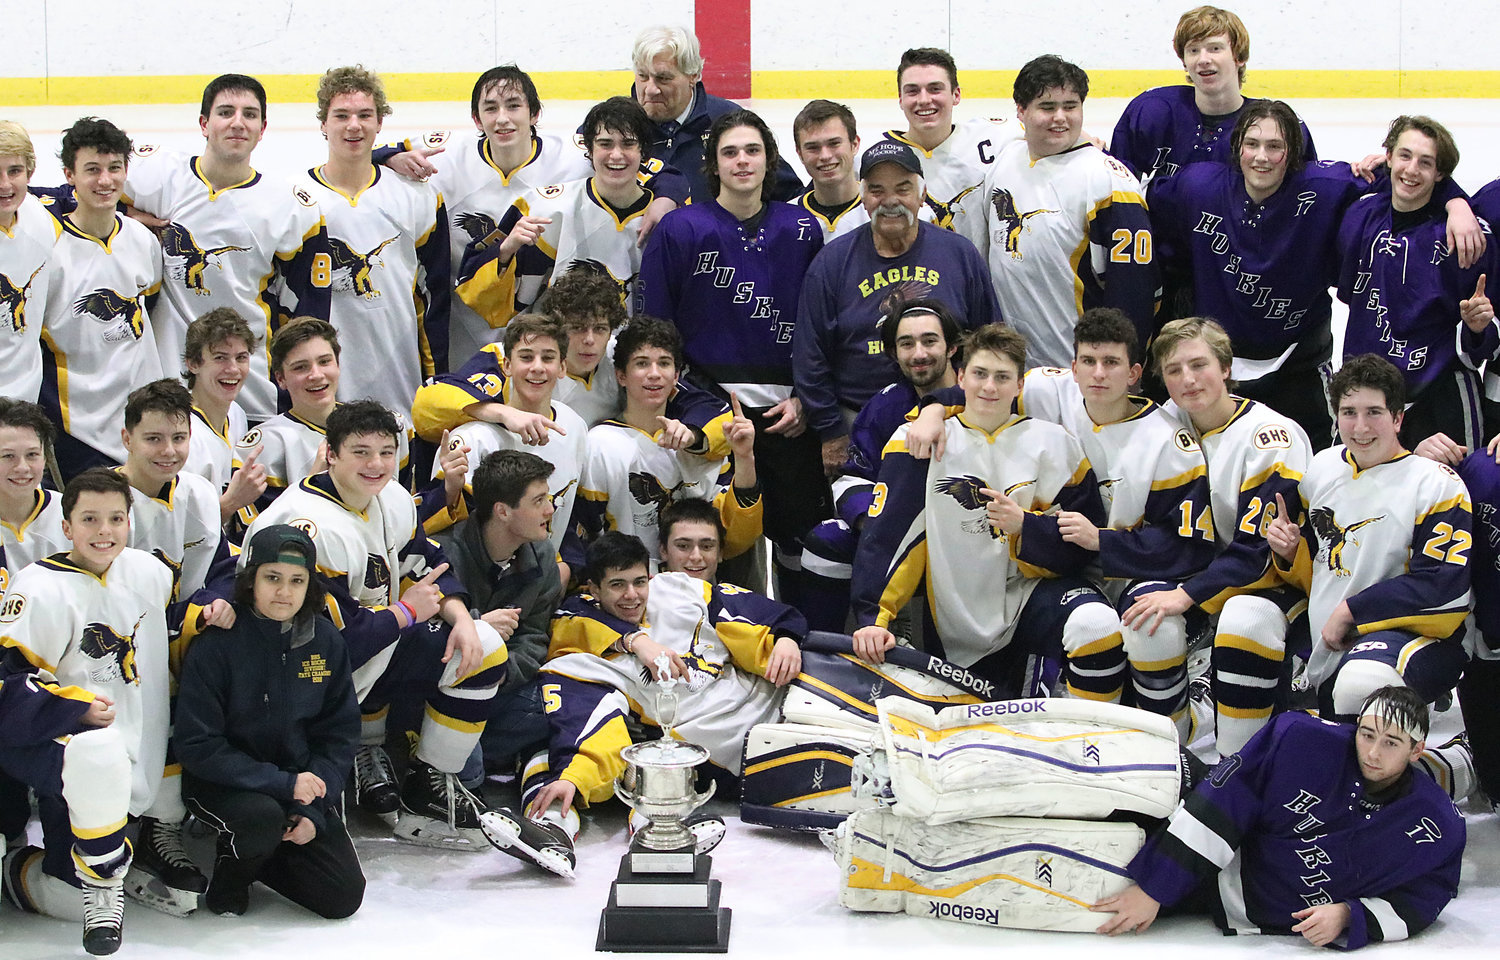 At the center of this 2020 post-game gathering of Barrington and Mt. Hope boys’ ice hockey players is J.P. Medeiros, father of the young man whose name has been memorialized with an annual hockey tournament and scholarship fund for two decades.